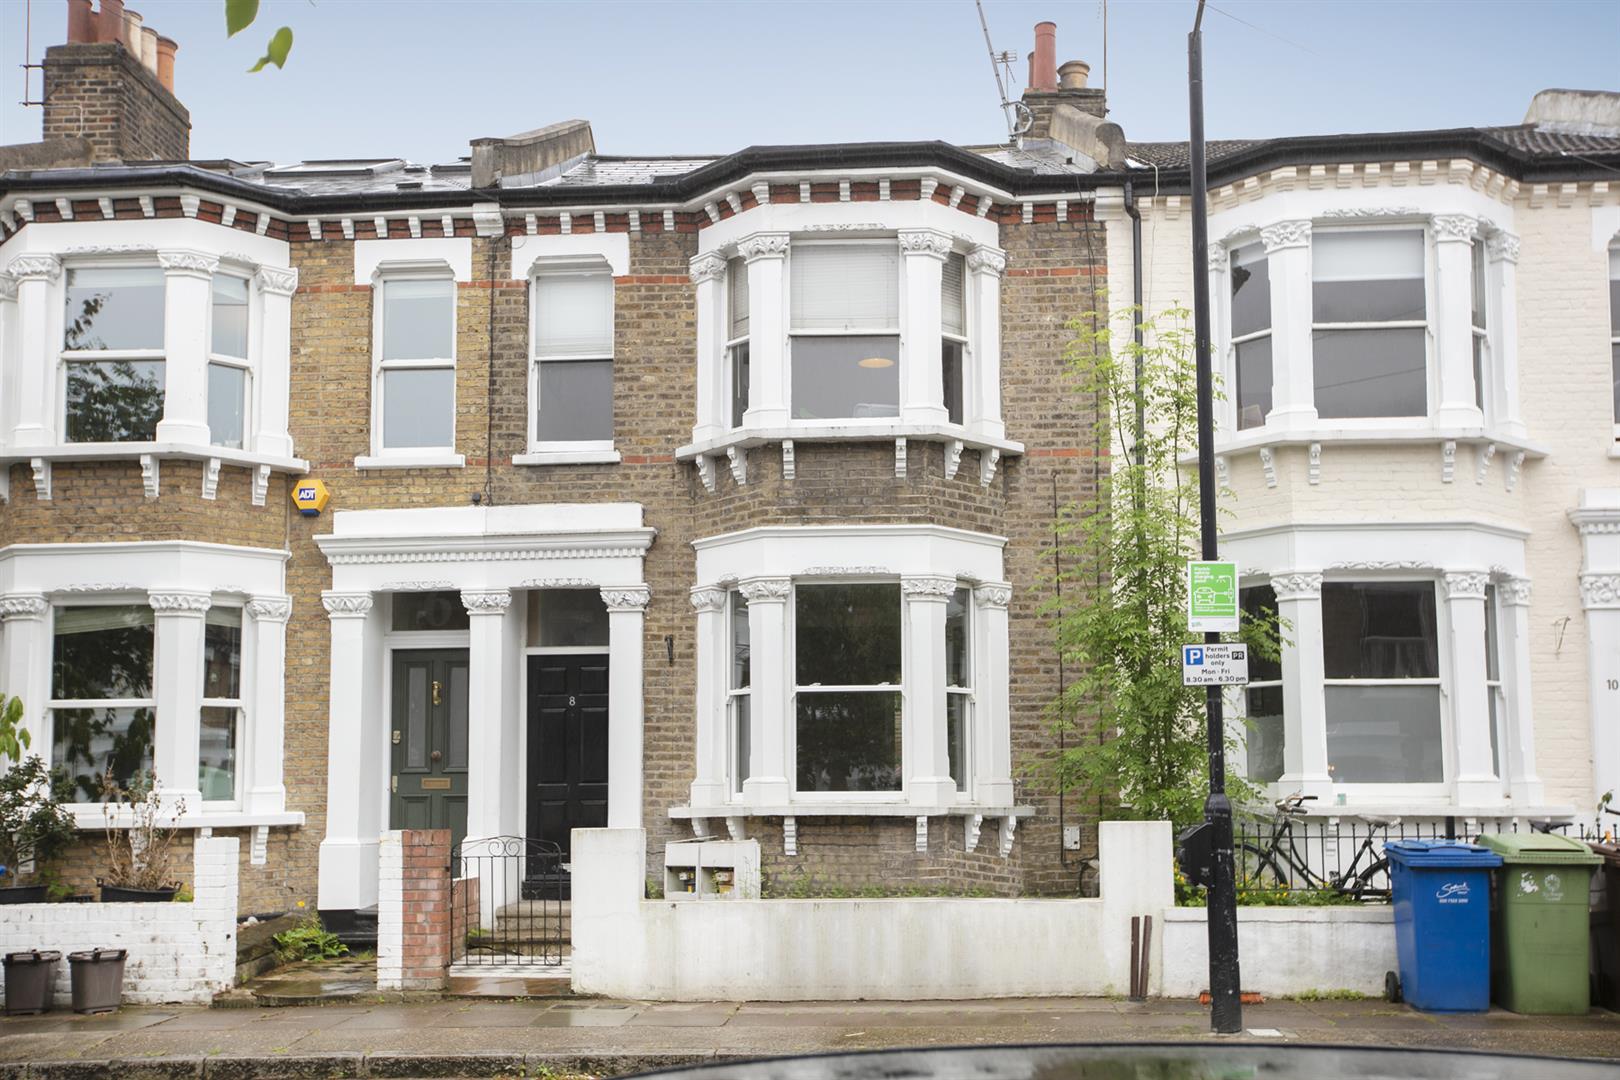 Flat - Conversion For Sale in Gairloch Road, Camberwell, SE5 956 view1